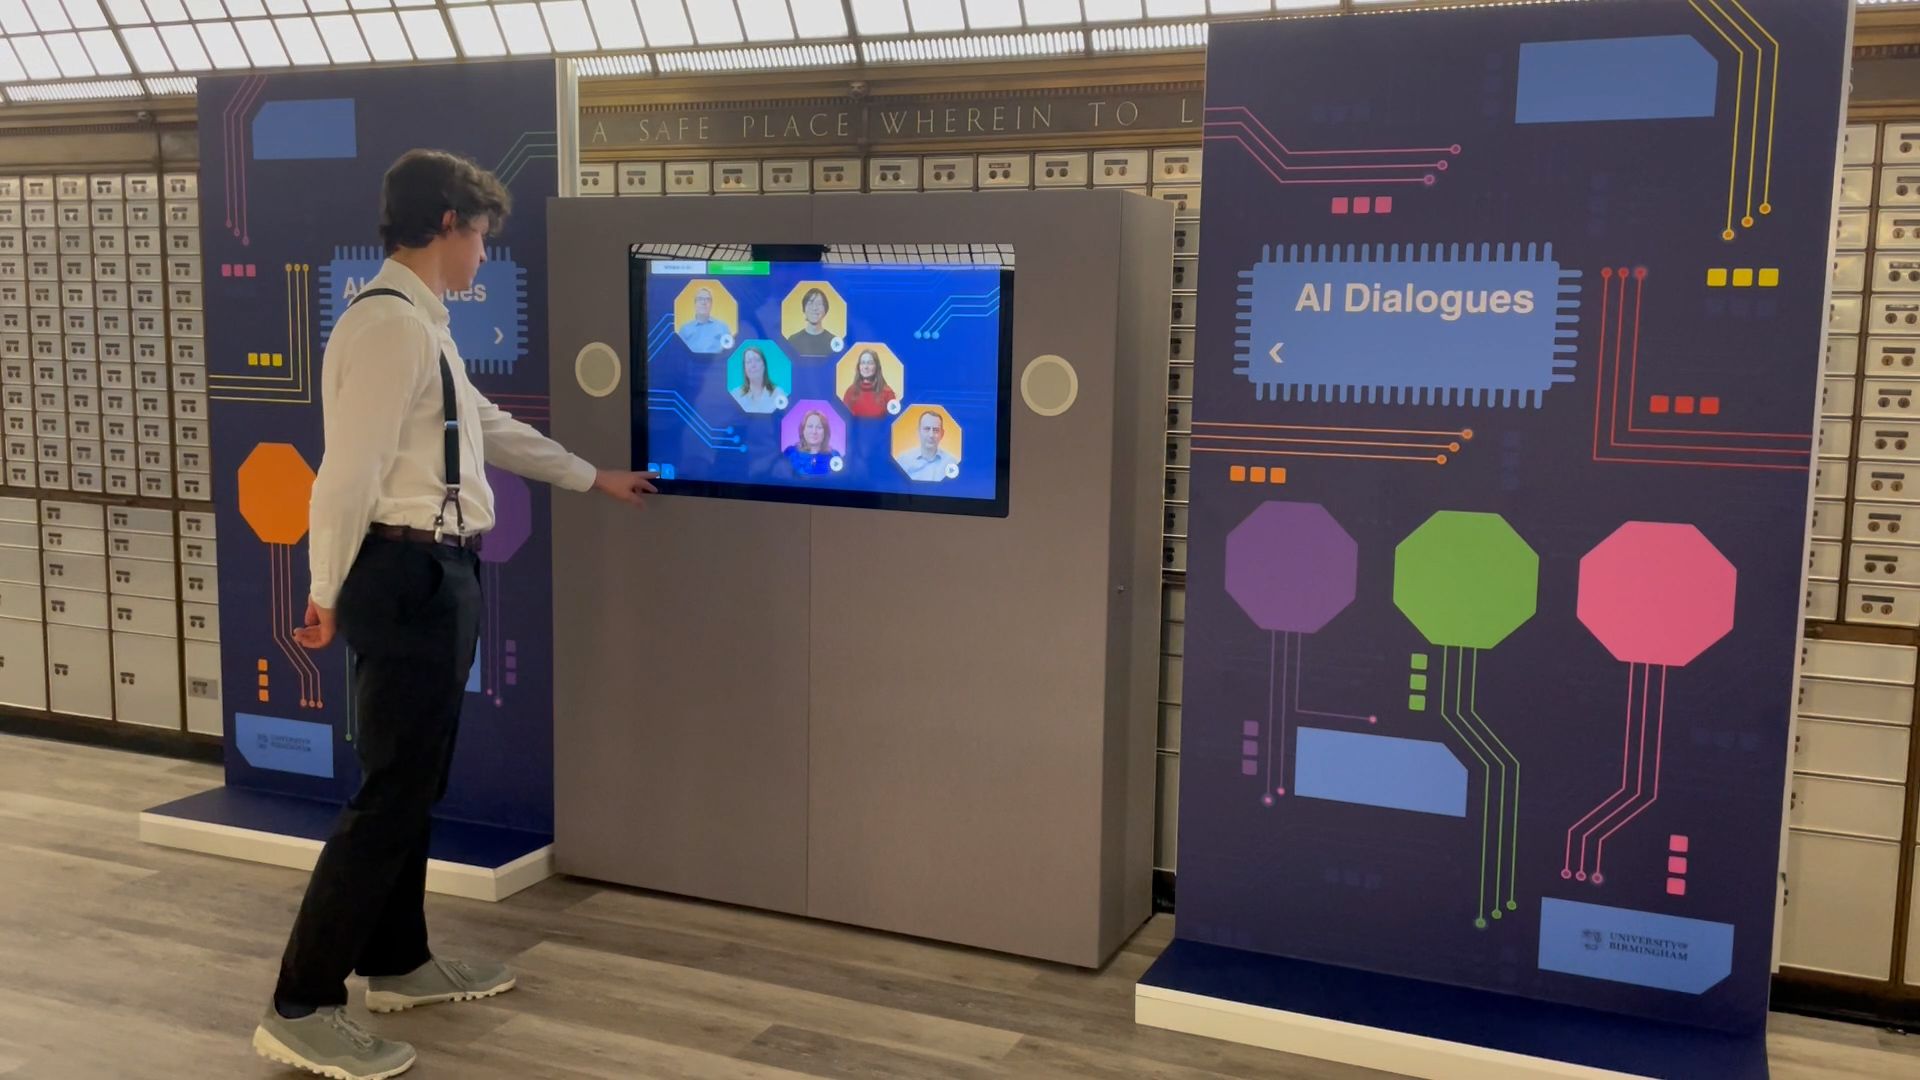 A person in a white shirt and black suspenders interacts with a touchscreen displaying various avatars labeled "AI Dialogues" in a modern setting. The background features a wall of mailboxes and two panels with colorful circuitry designs.